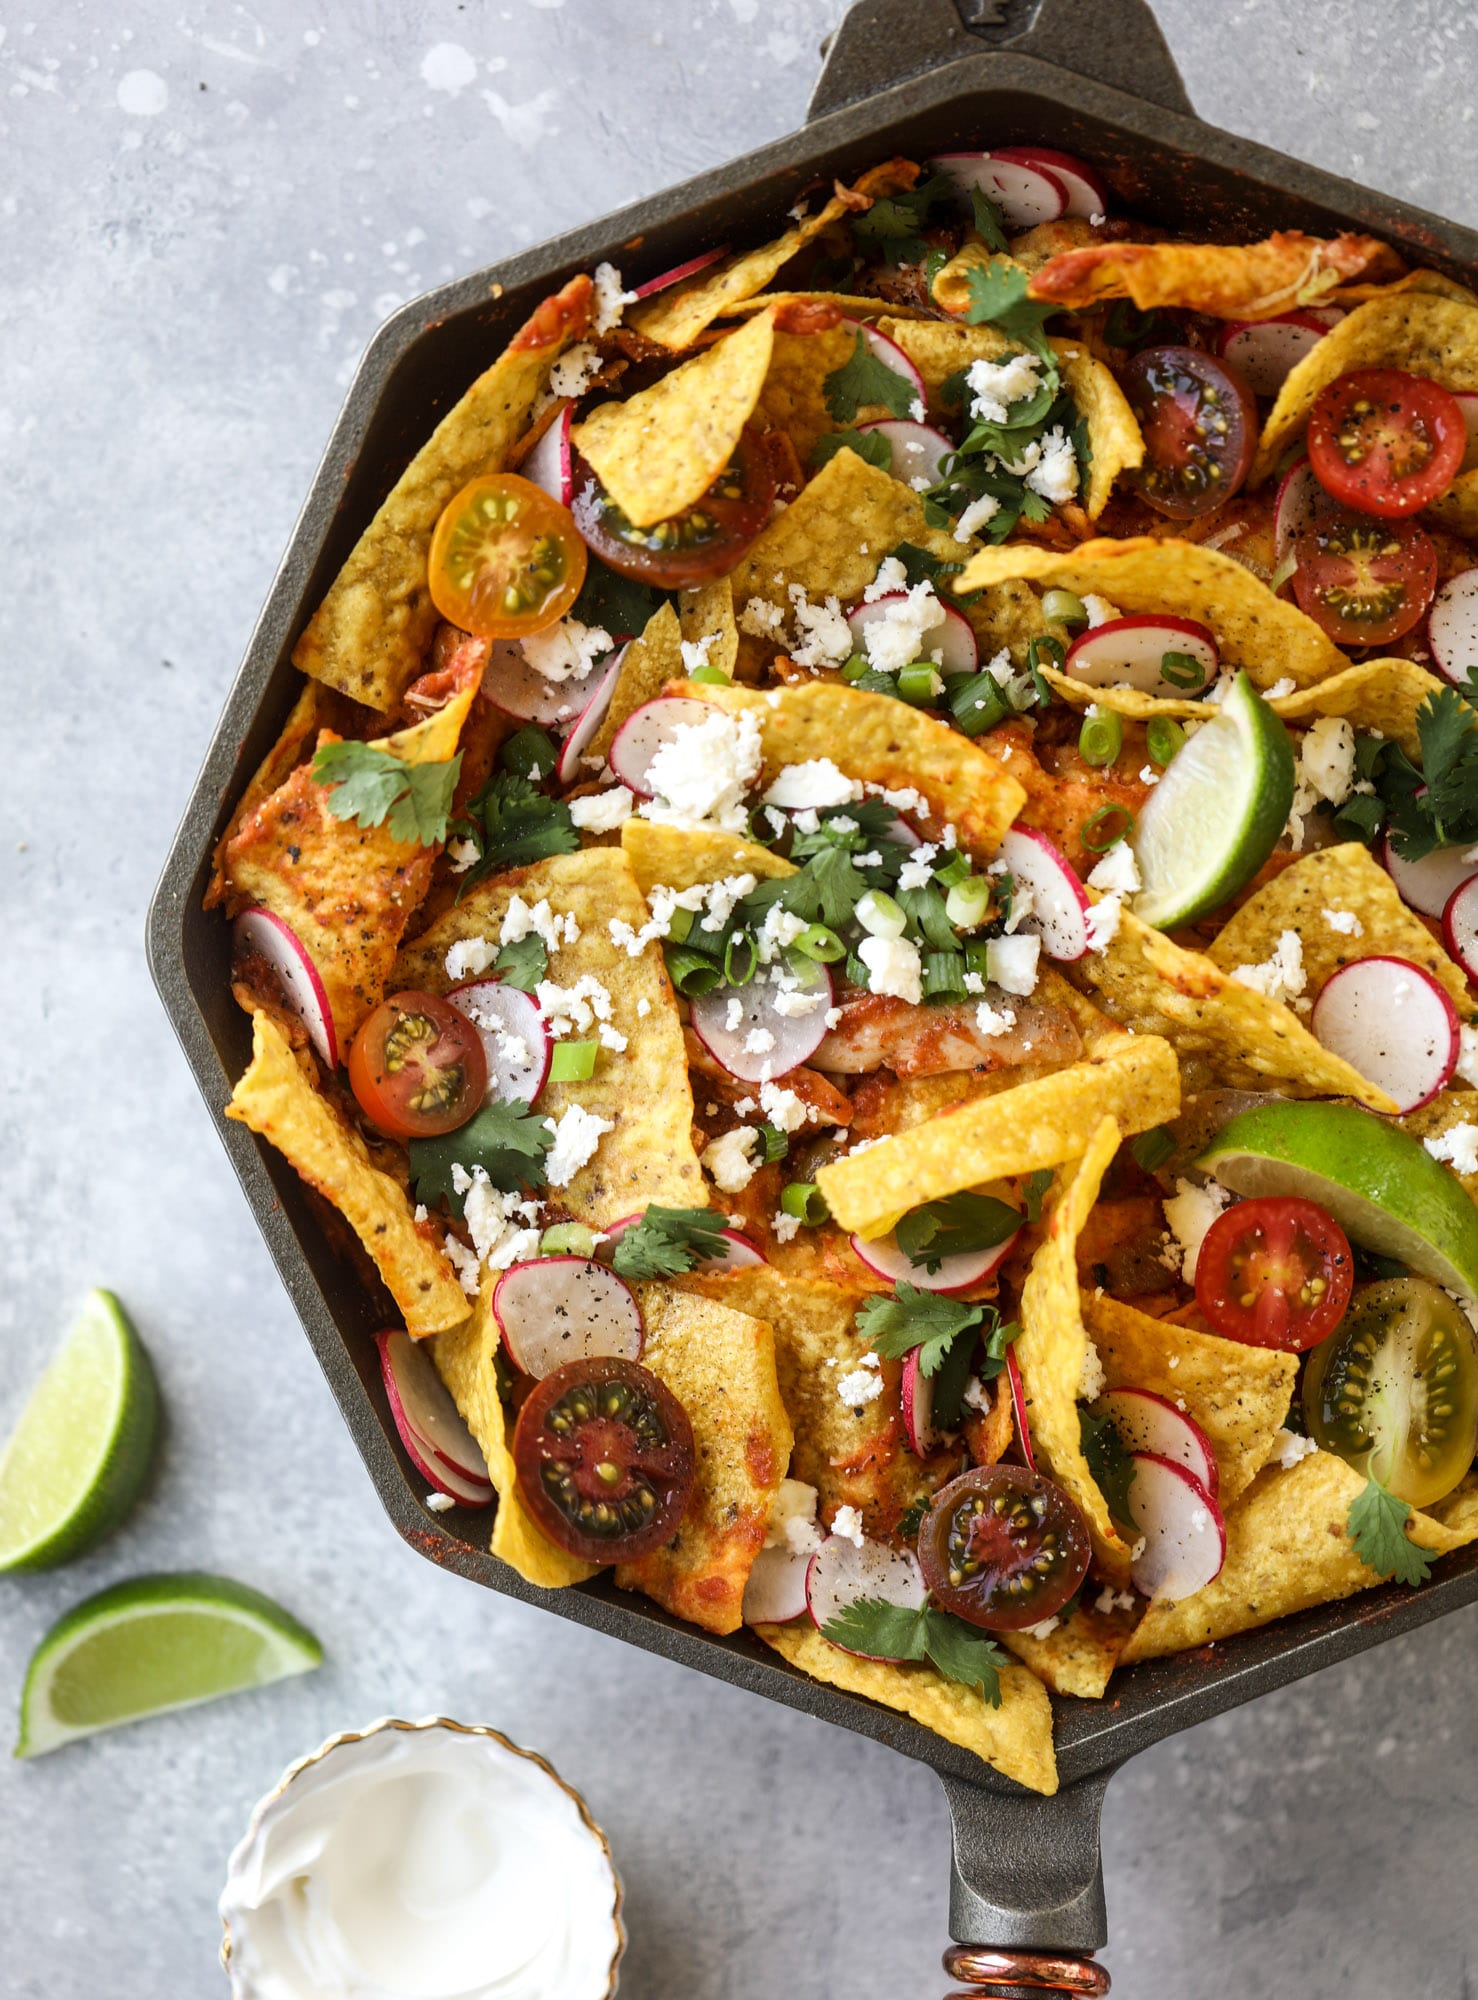 This skillet of fire roasted chicken chilaquiles is so easy, flavorful and delicious! A quick blender sauce made with fire roasted tomatoes, shredded chicken, lots of tortilla chips and your favorite toppings. Give me all the cheese and guacamole! I howsweeteats.com #chicken #chilaquiles #recipe #easy #dinner